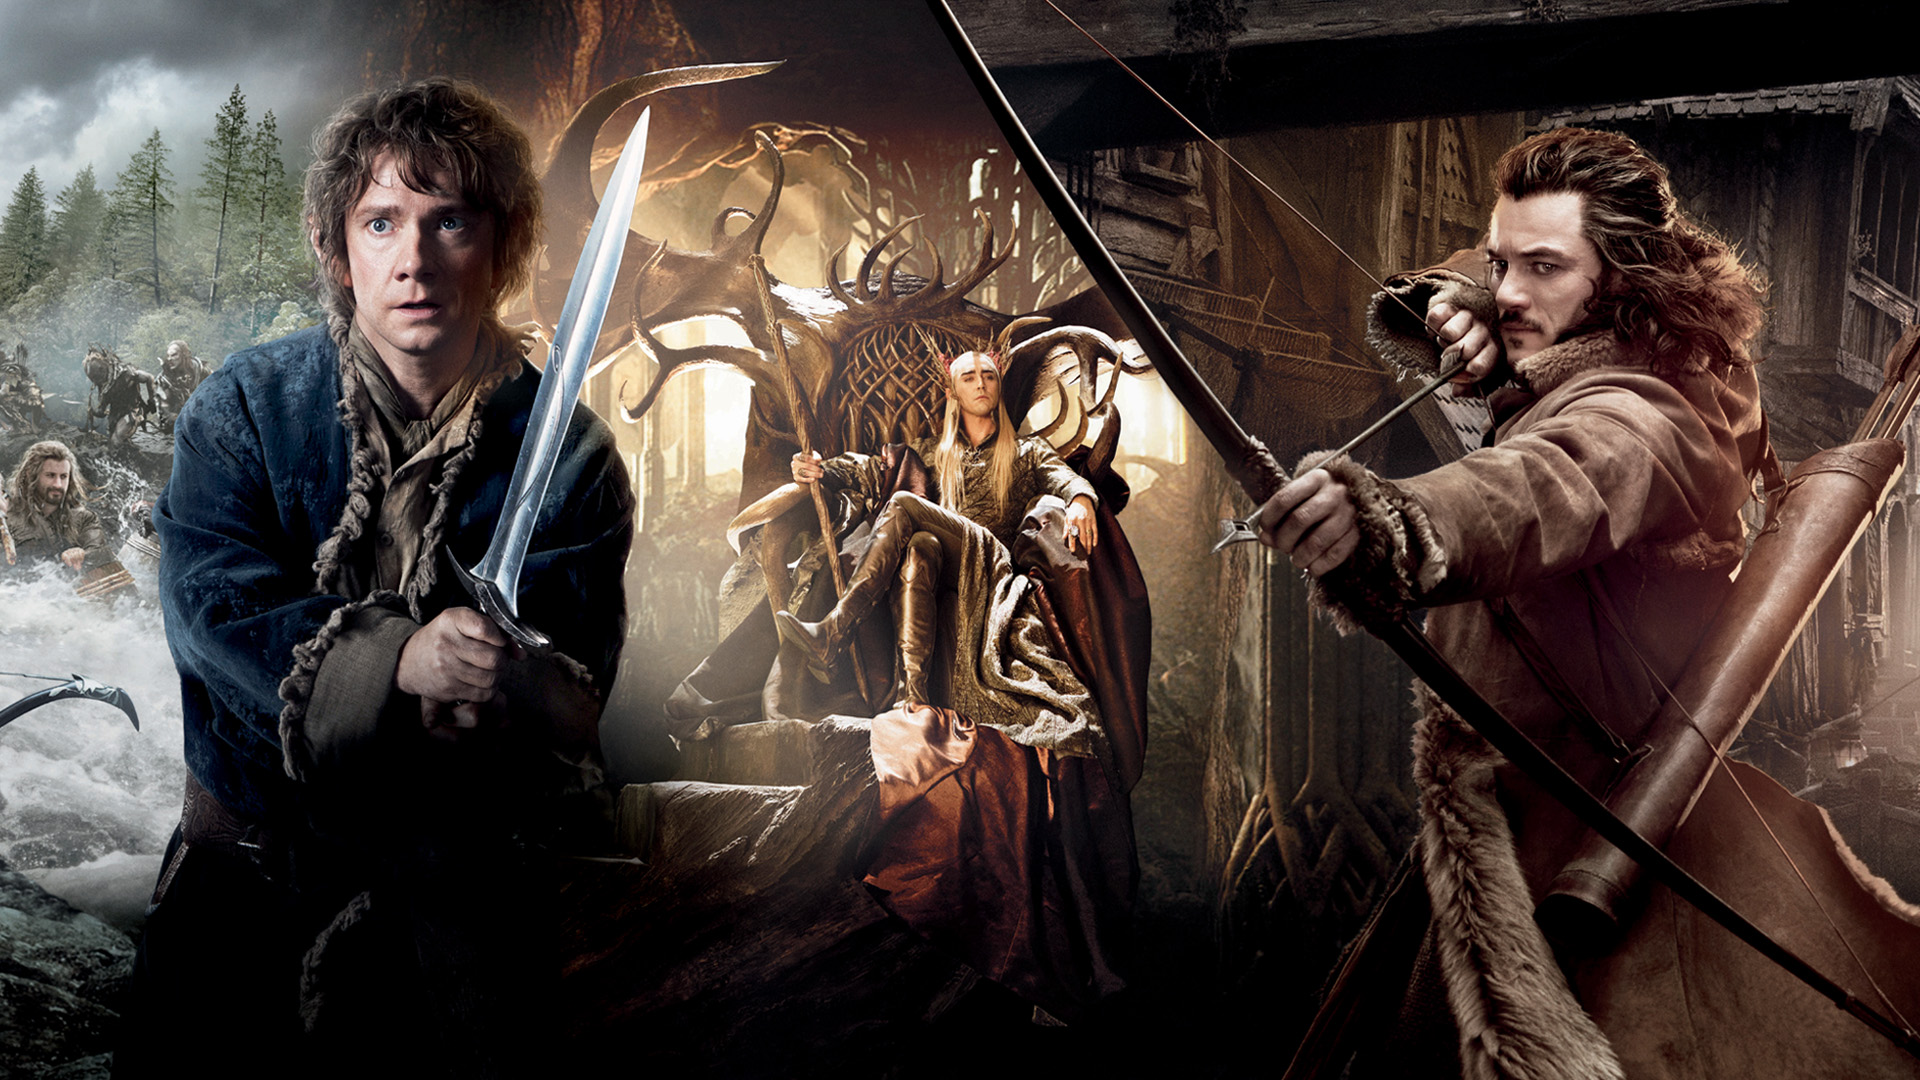 The Hobbit: The Desolation of Smaug download the new for apple